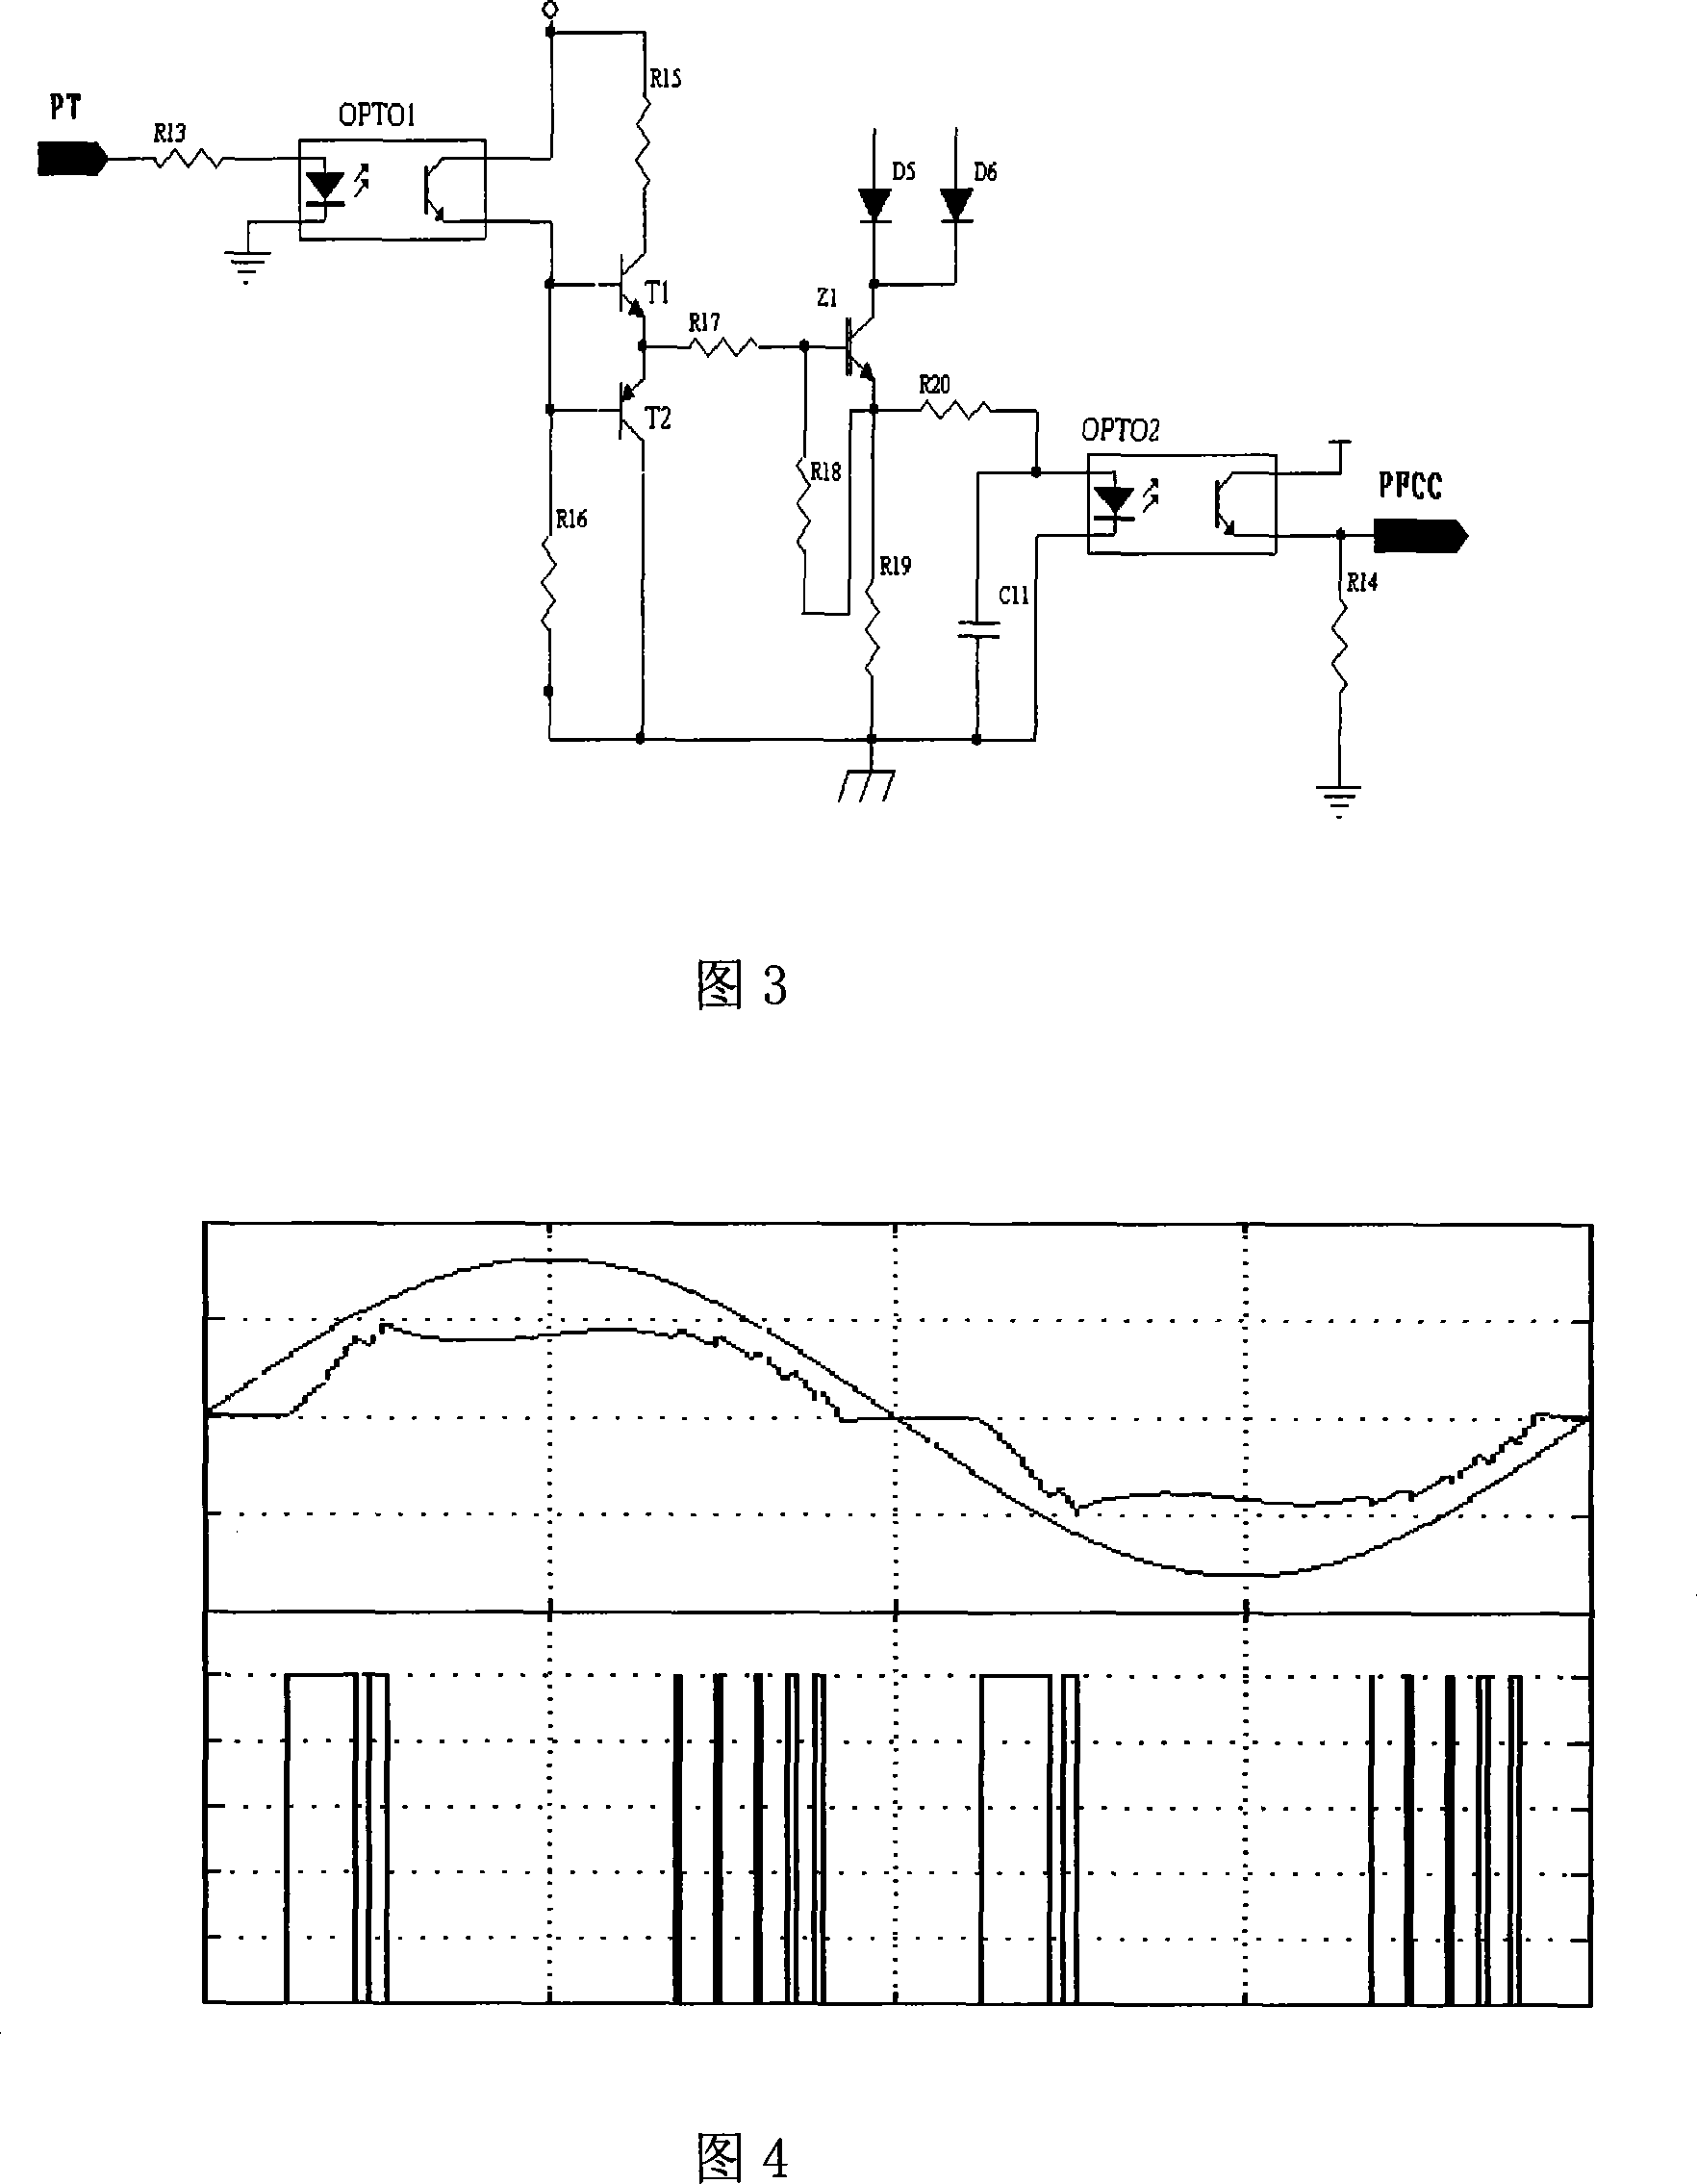 Method of DC power device for improving power factor and adjusting output voltage